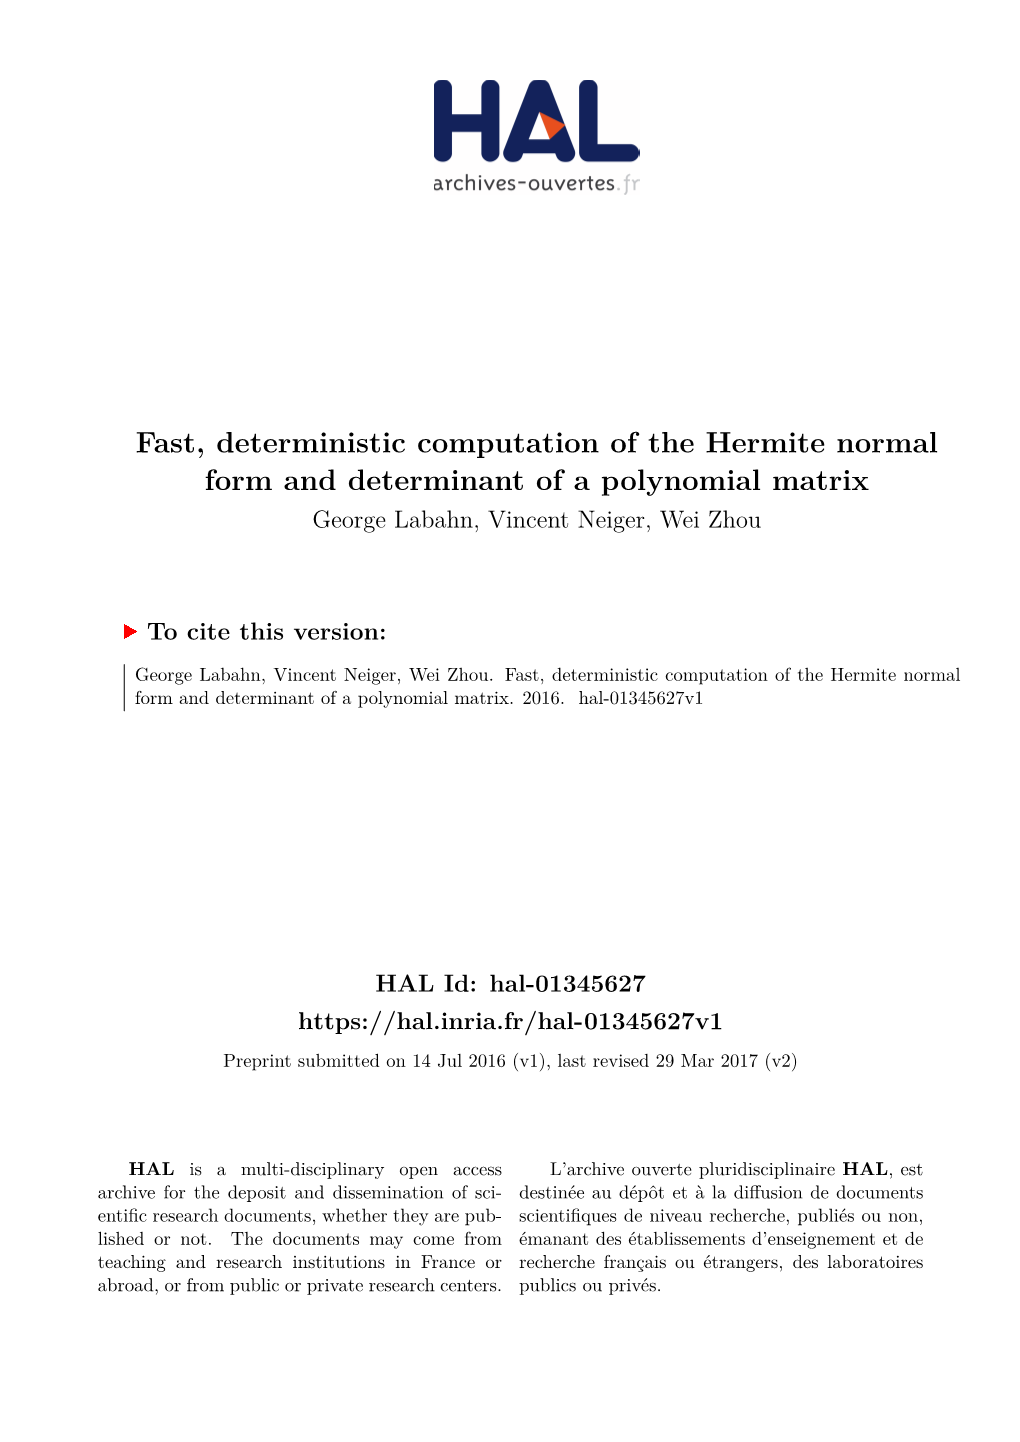 Fast, Deterministic Computation of the Hermite Normal Form and Determinant of a Polynomial Matrix George Labahn, Vincent Neiger, Wei Zhou